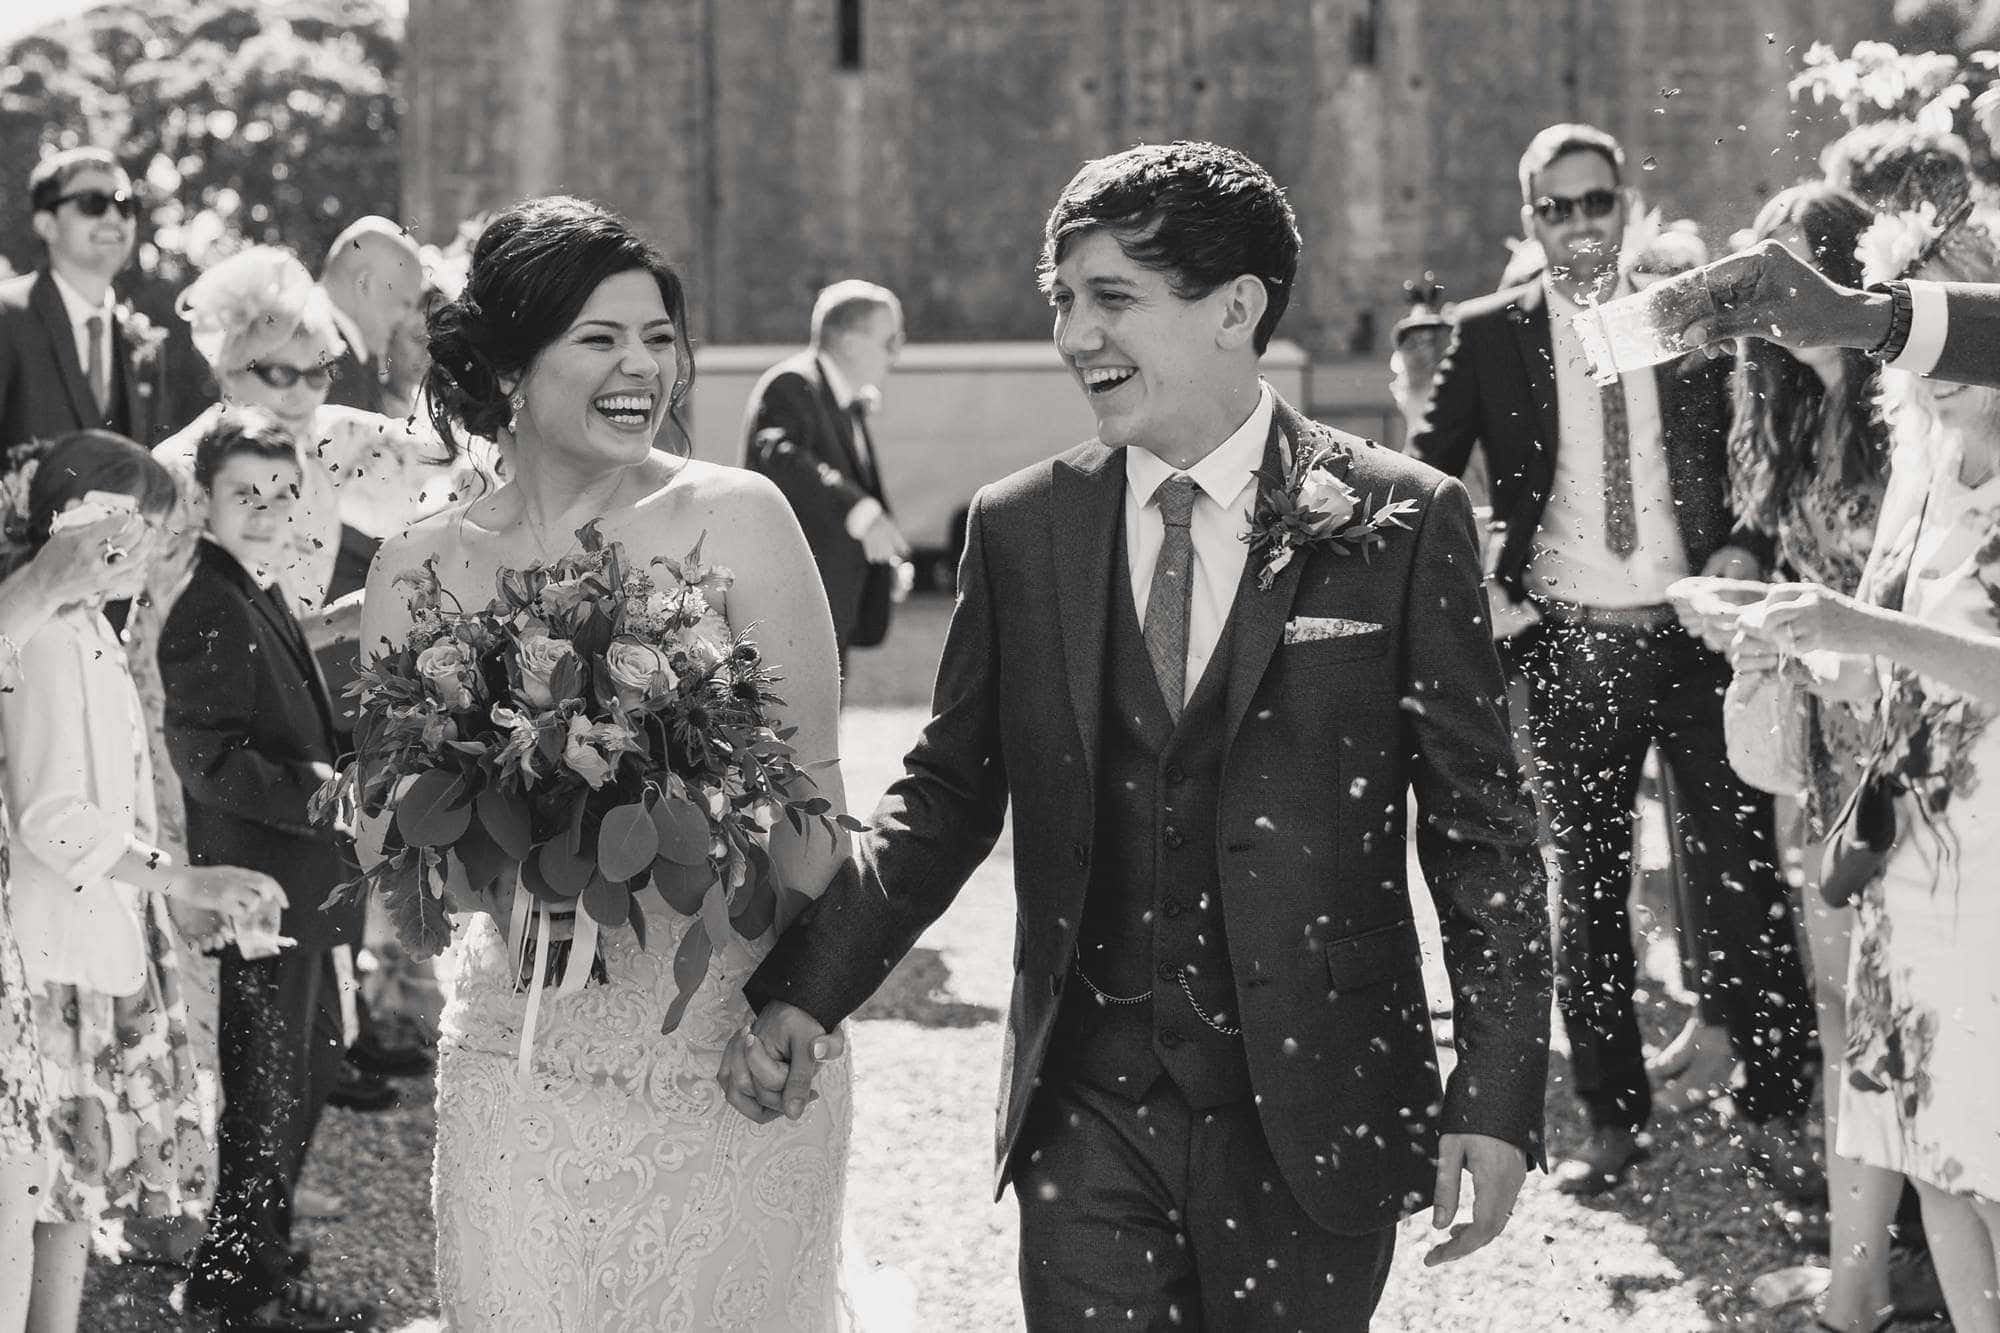 Wedding guests throw confetti at the bride and groom on their wedding day at Hedingham Castle.